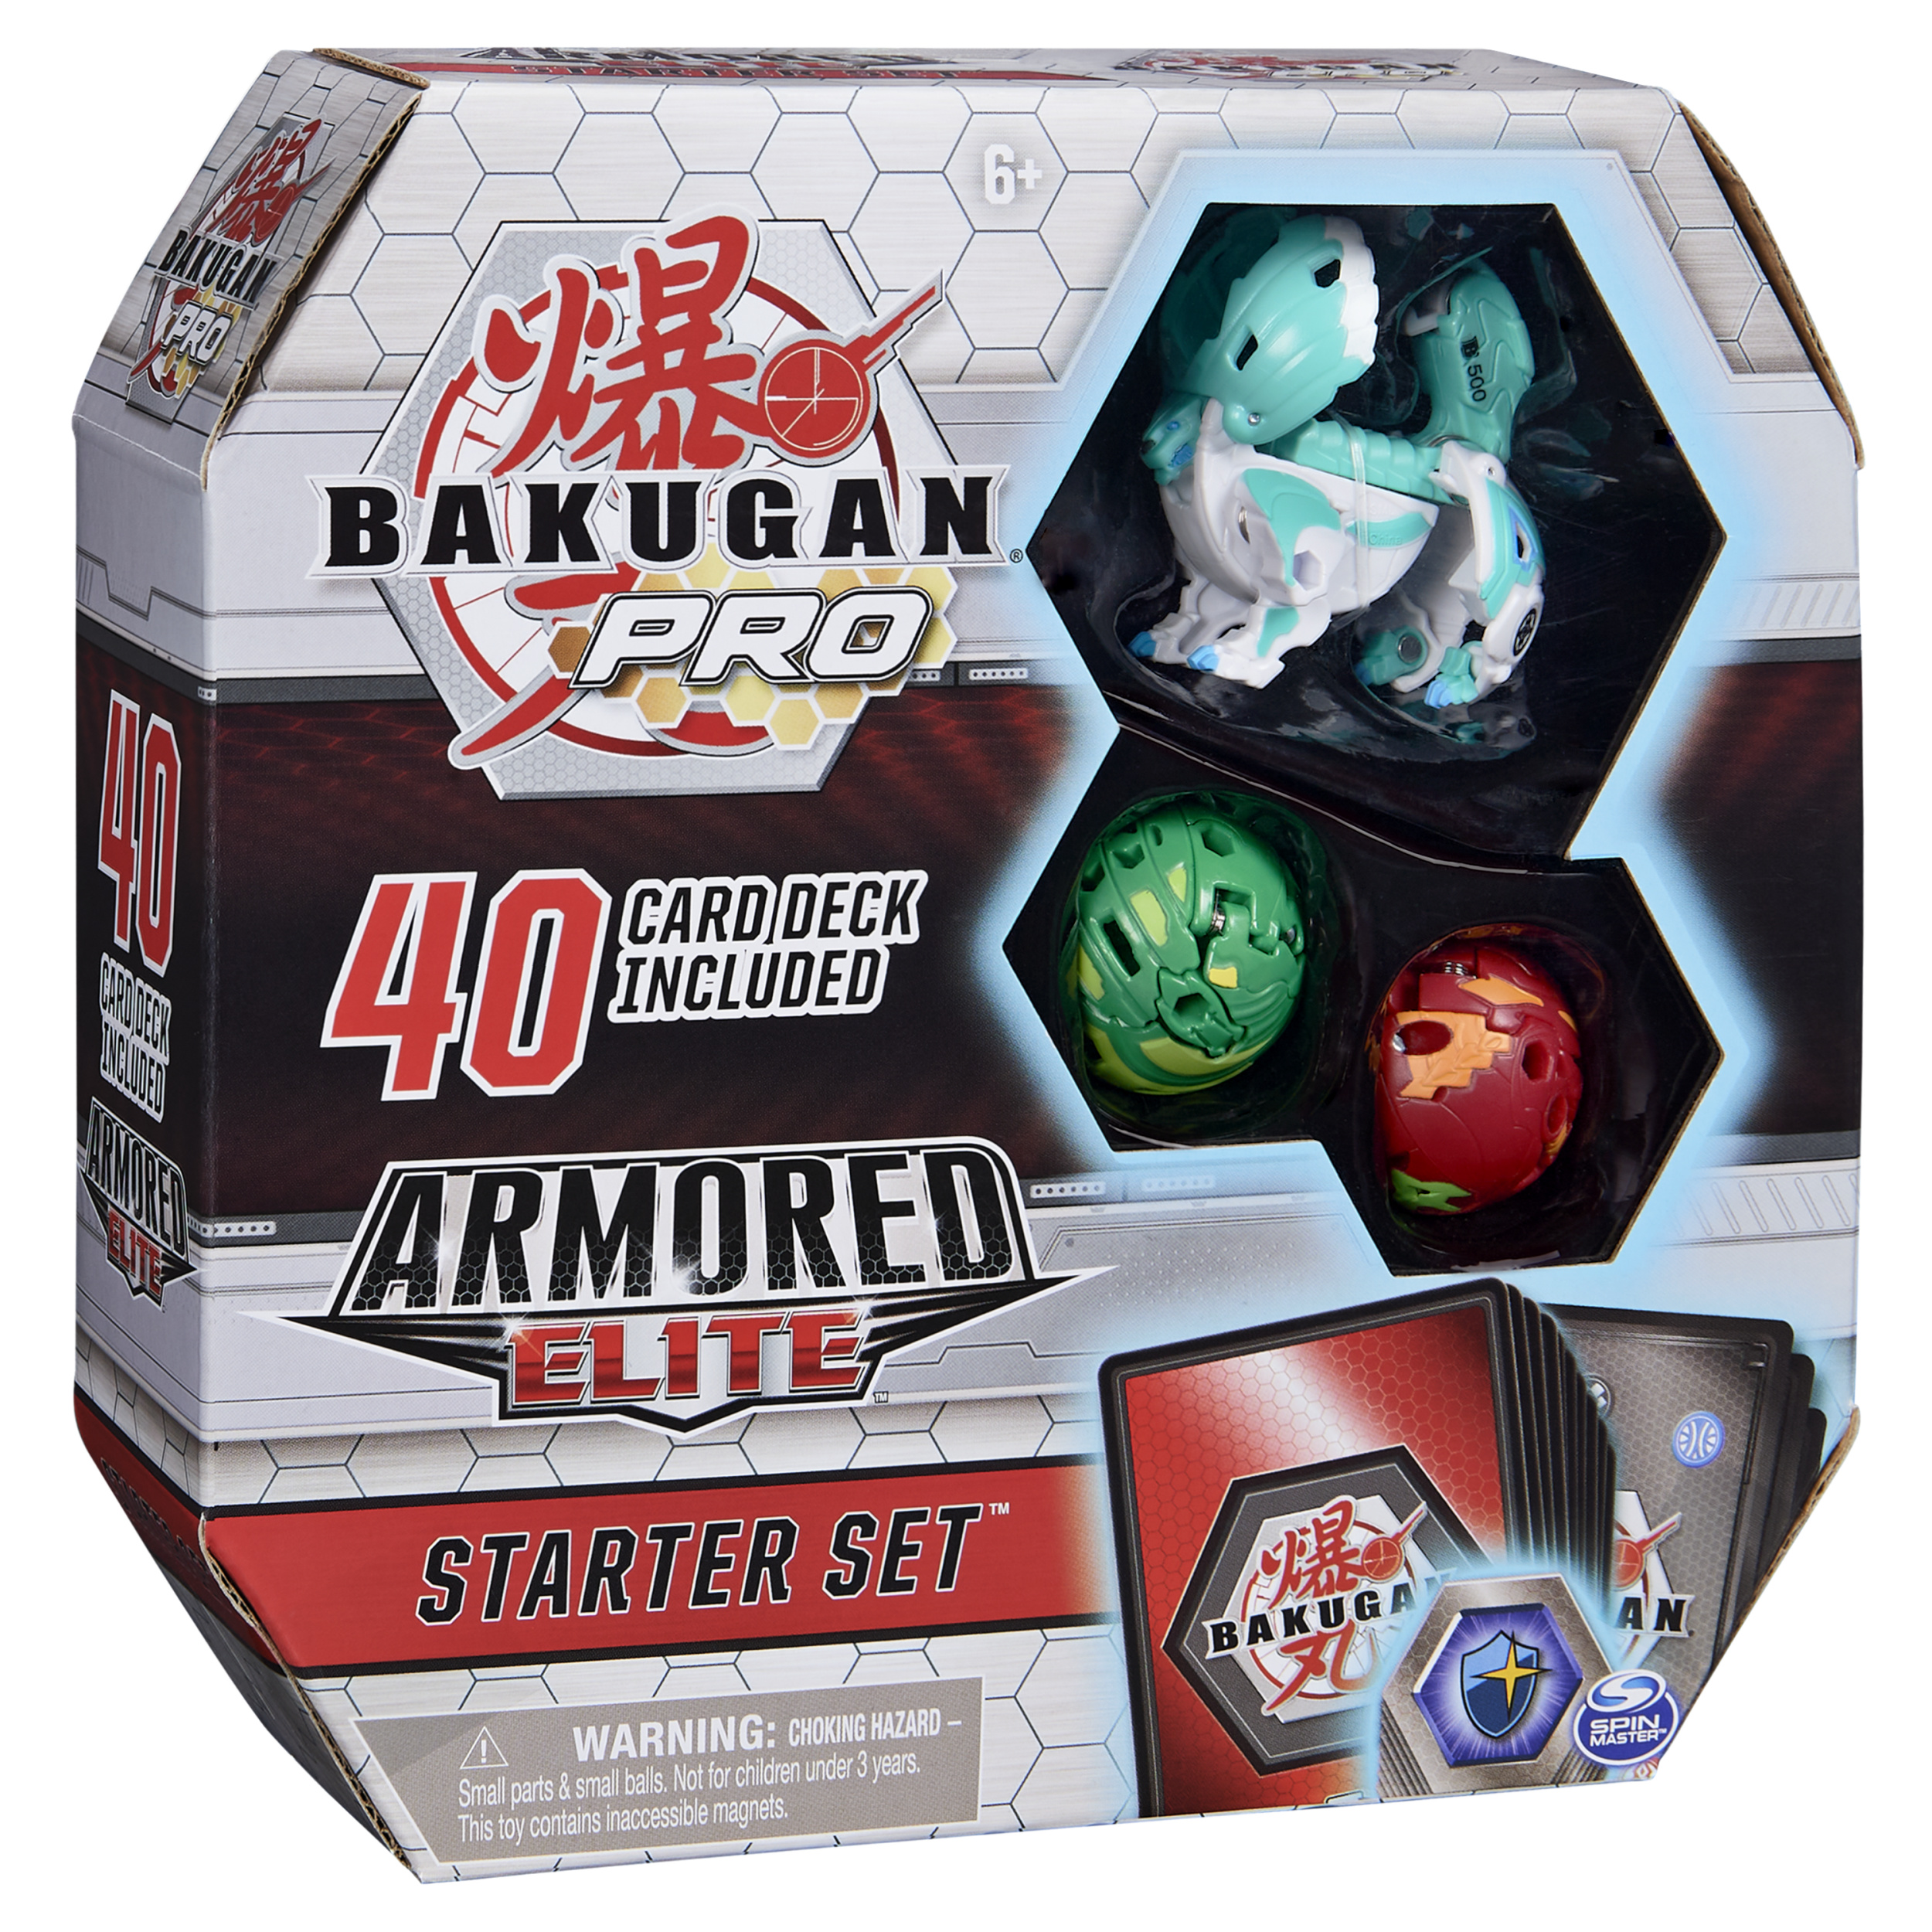 Bakugan Pro, Armored Elite Starter Set with Hydorous Ultra, 2 Bakugan and Collectible Trading Cards - image 5 of 5